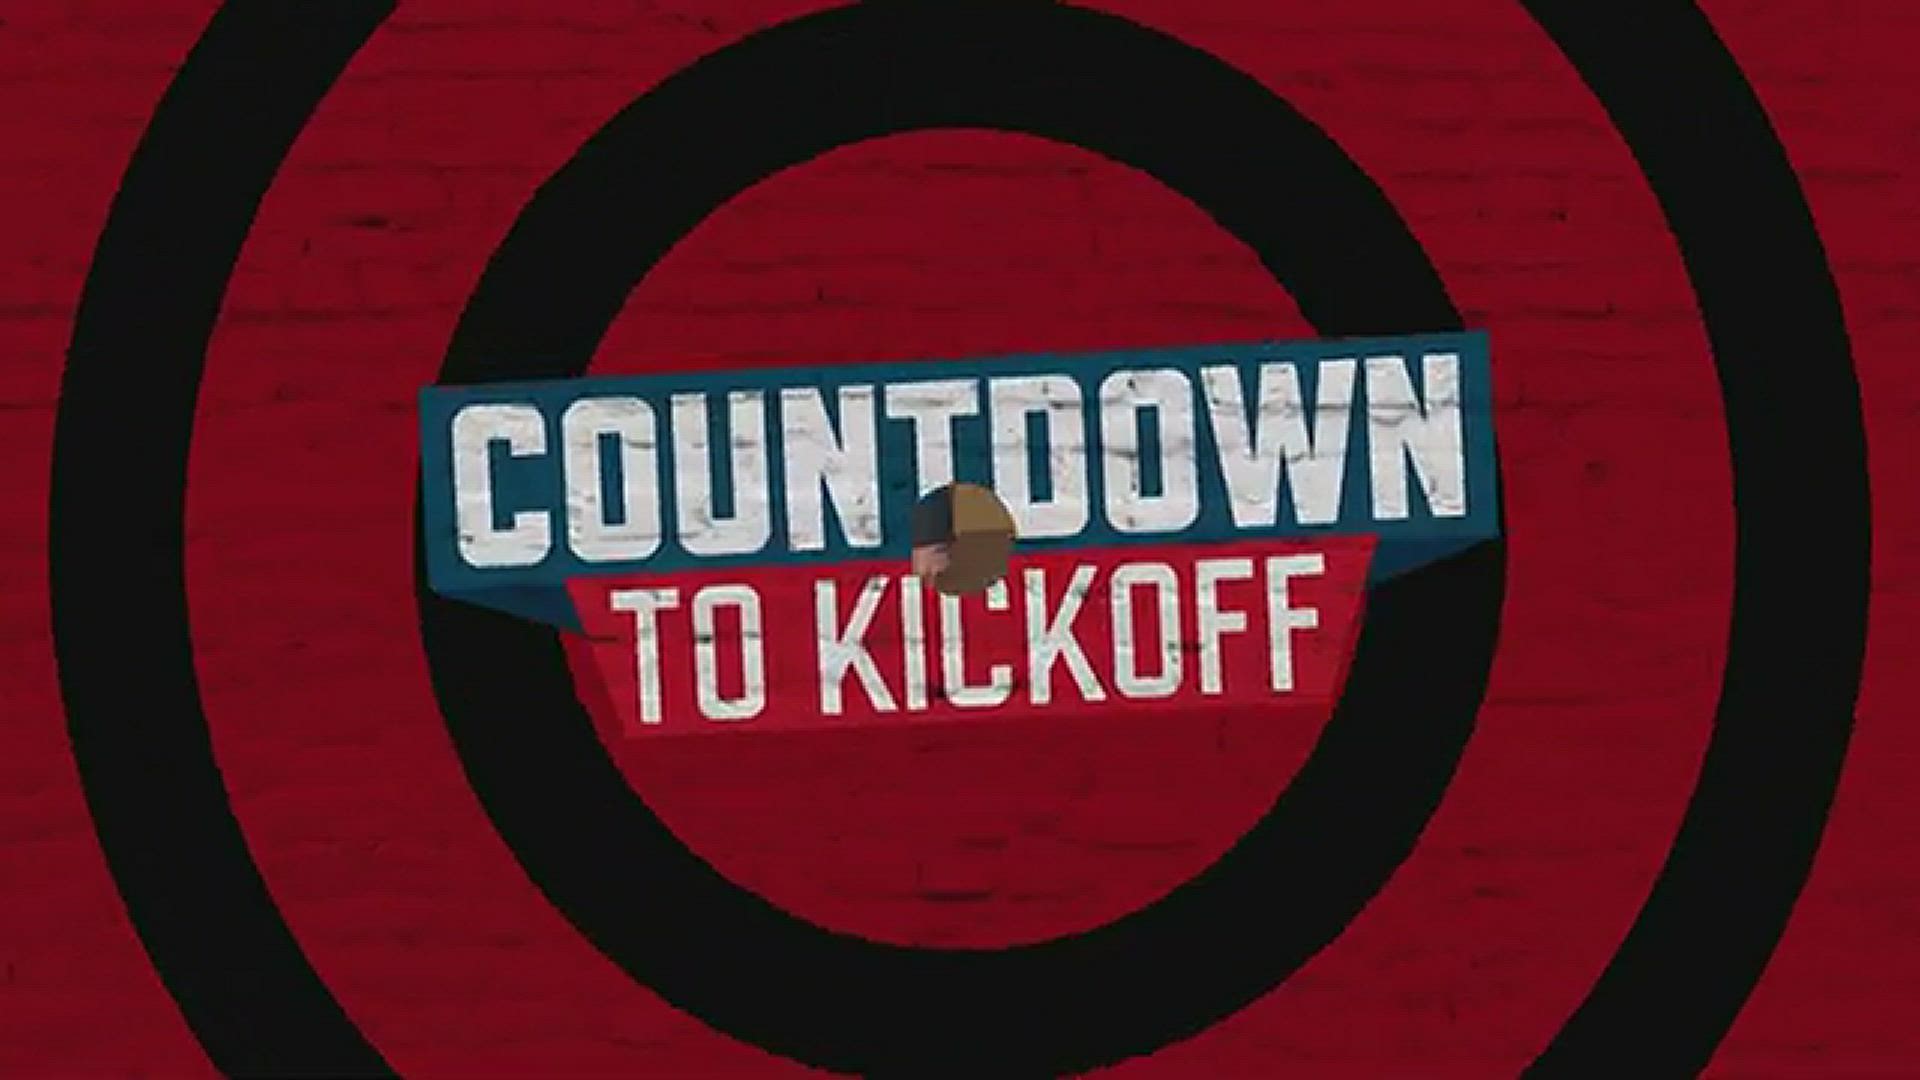 It's nearly time for the Houston Texans to kick off their season. Jason Bristol, Matt Musil, Daniel Gotera and Seth Payne look ahead at what you can expect for this